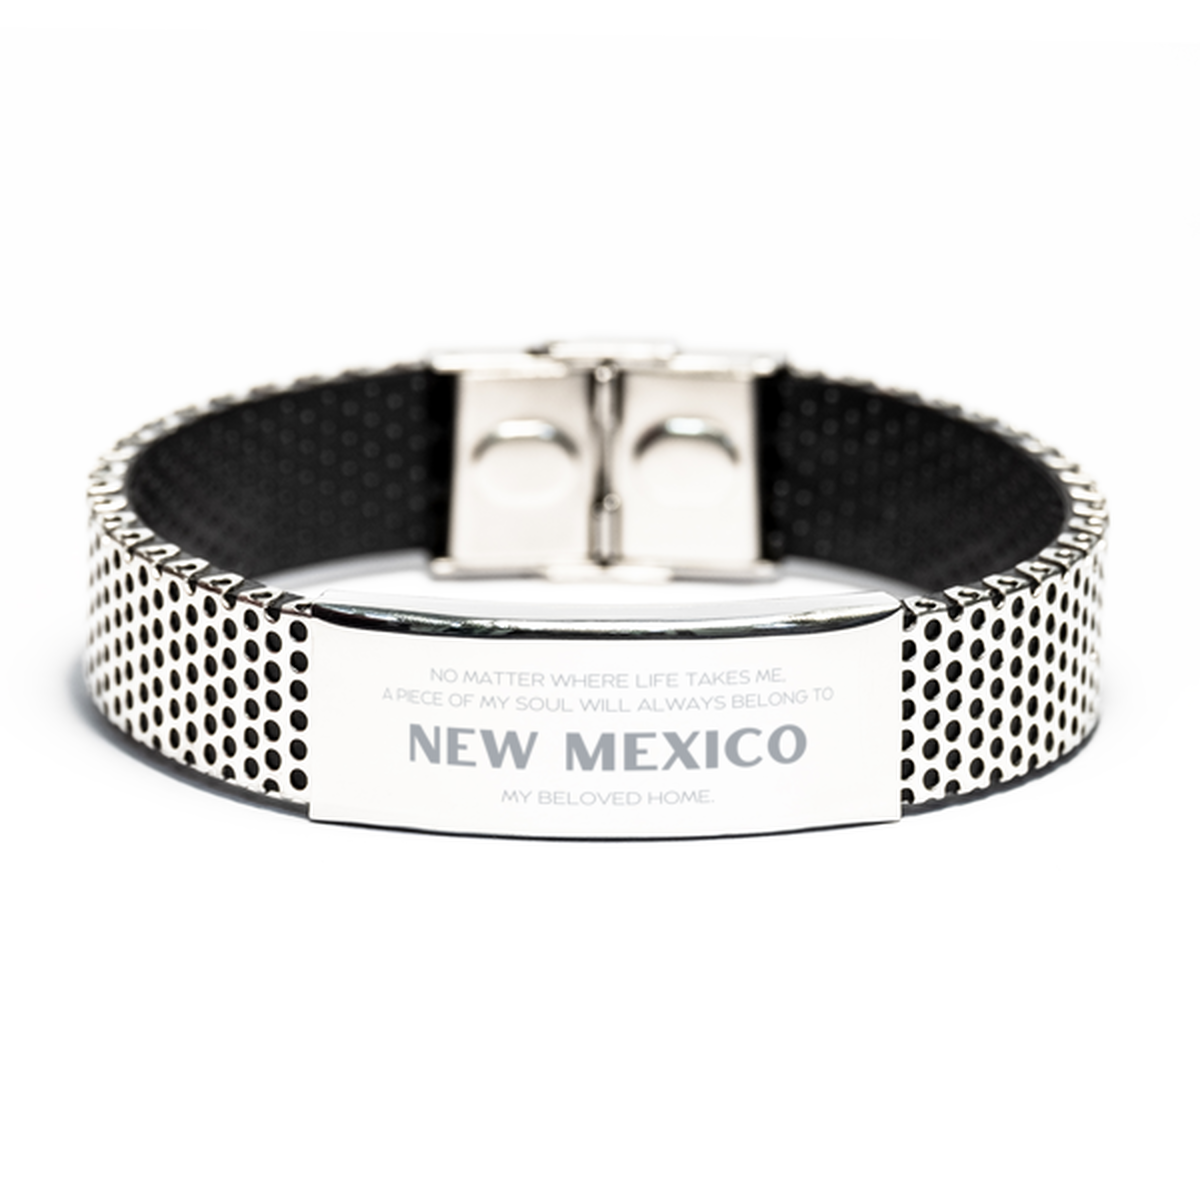 Love New Mexico State Gifts, My soul will always belong to New Mexico, Proud Stainless Steel Bracelet, Birthday Unique Gifts For New Mexico Men, Women, Friends